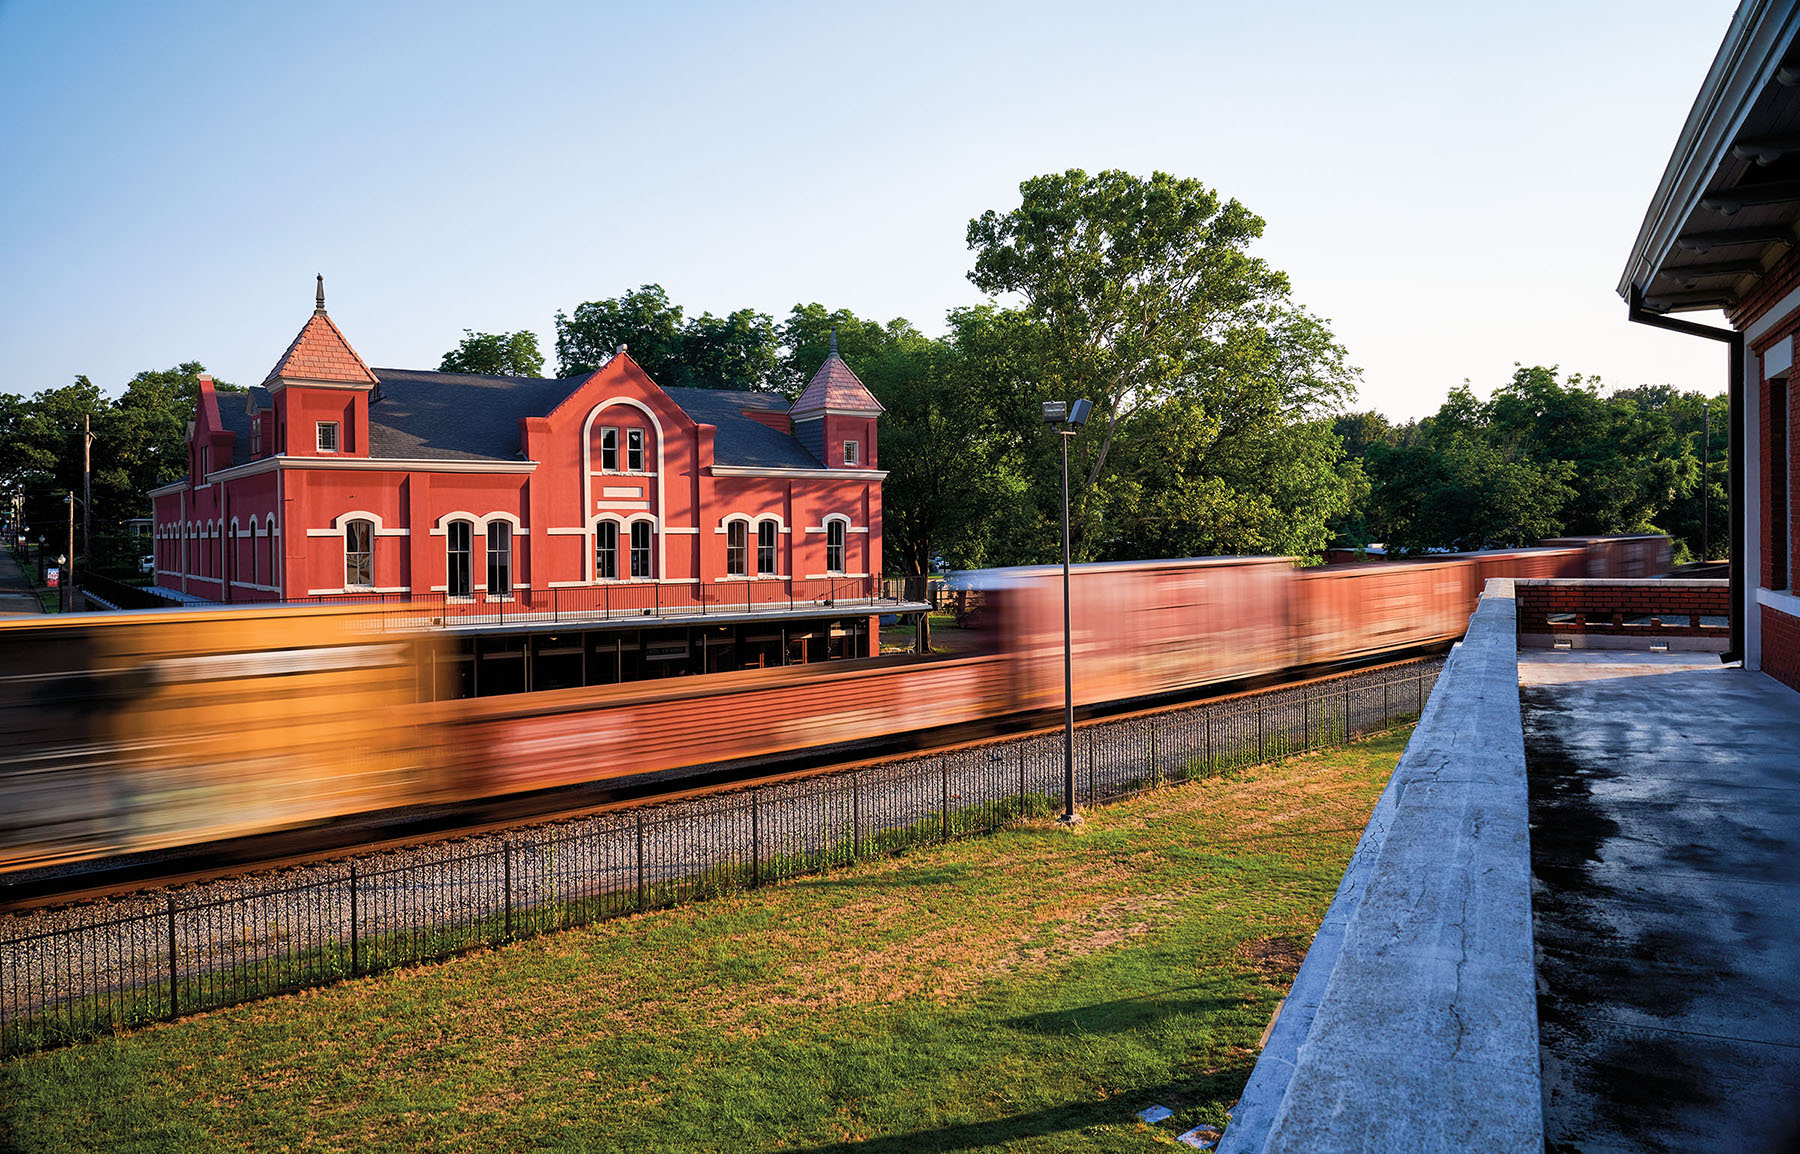 The blur of a freight train passes in front of a large red brick building with ornate rooftops